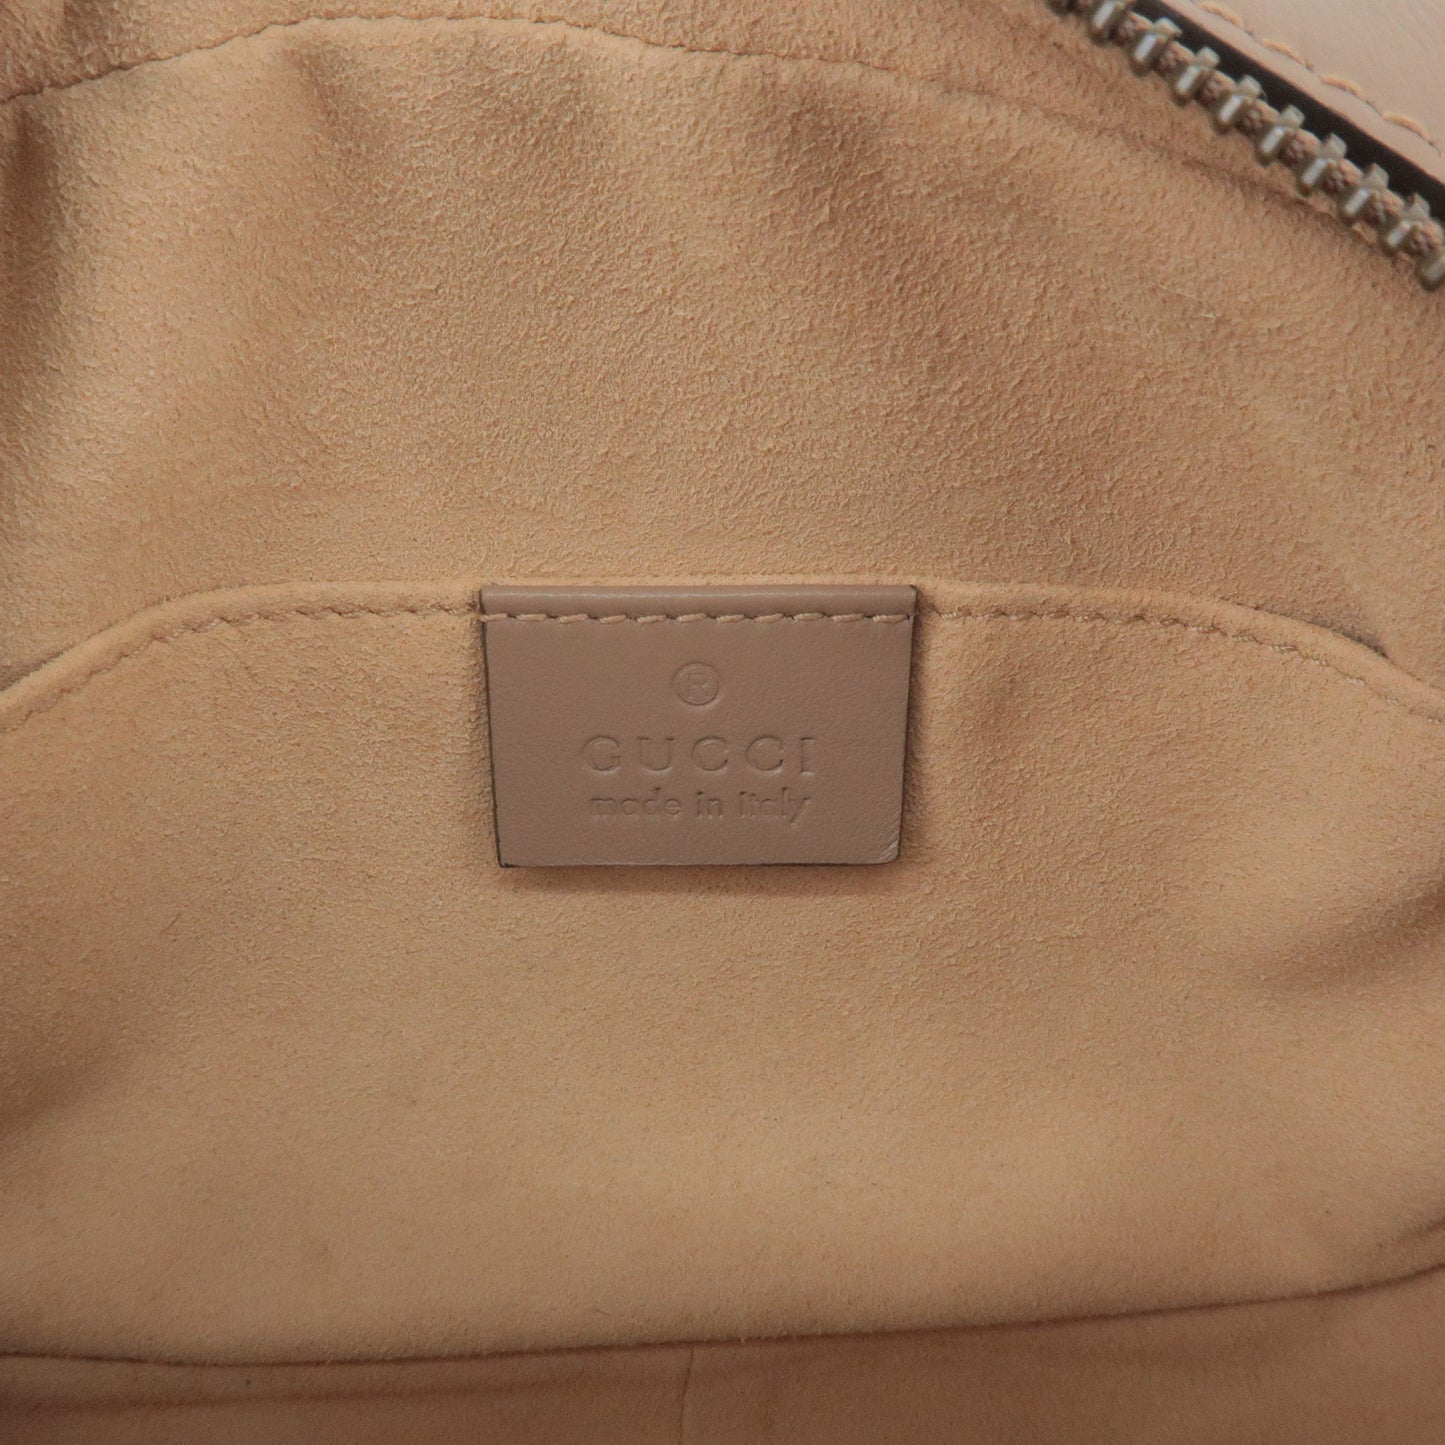 GUCCI GG Marmont Leather Chain Shoulder Bag Beige 448065